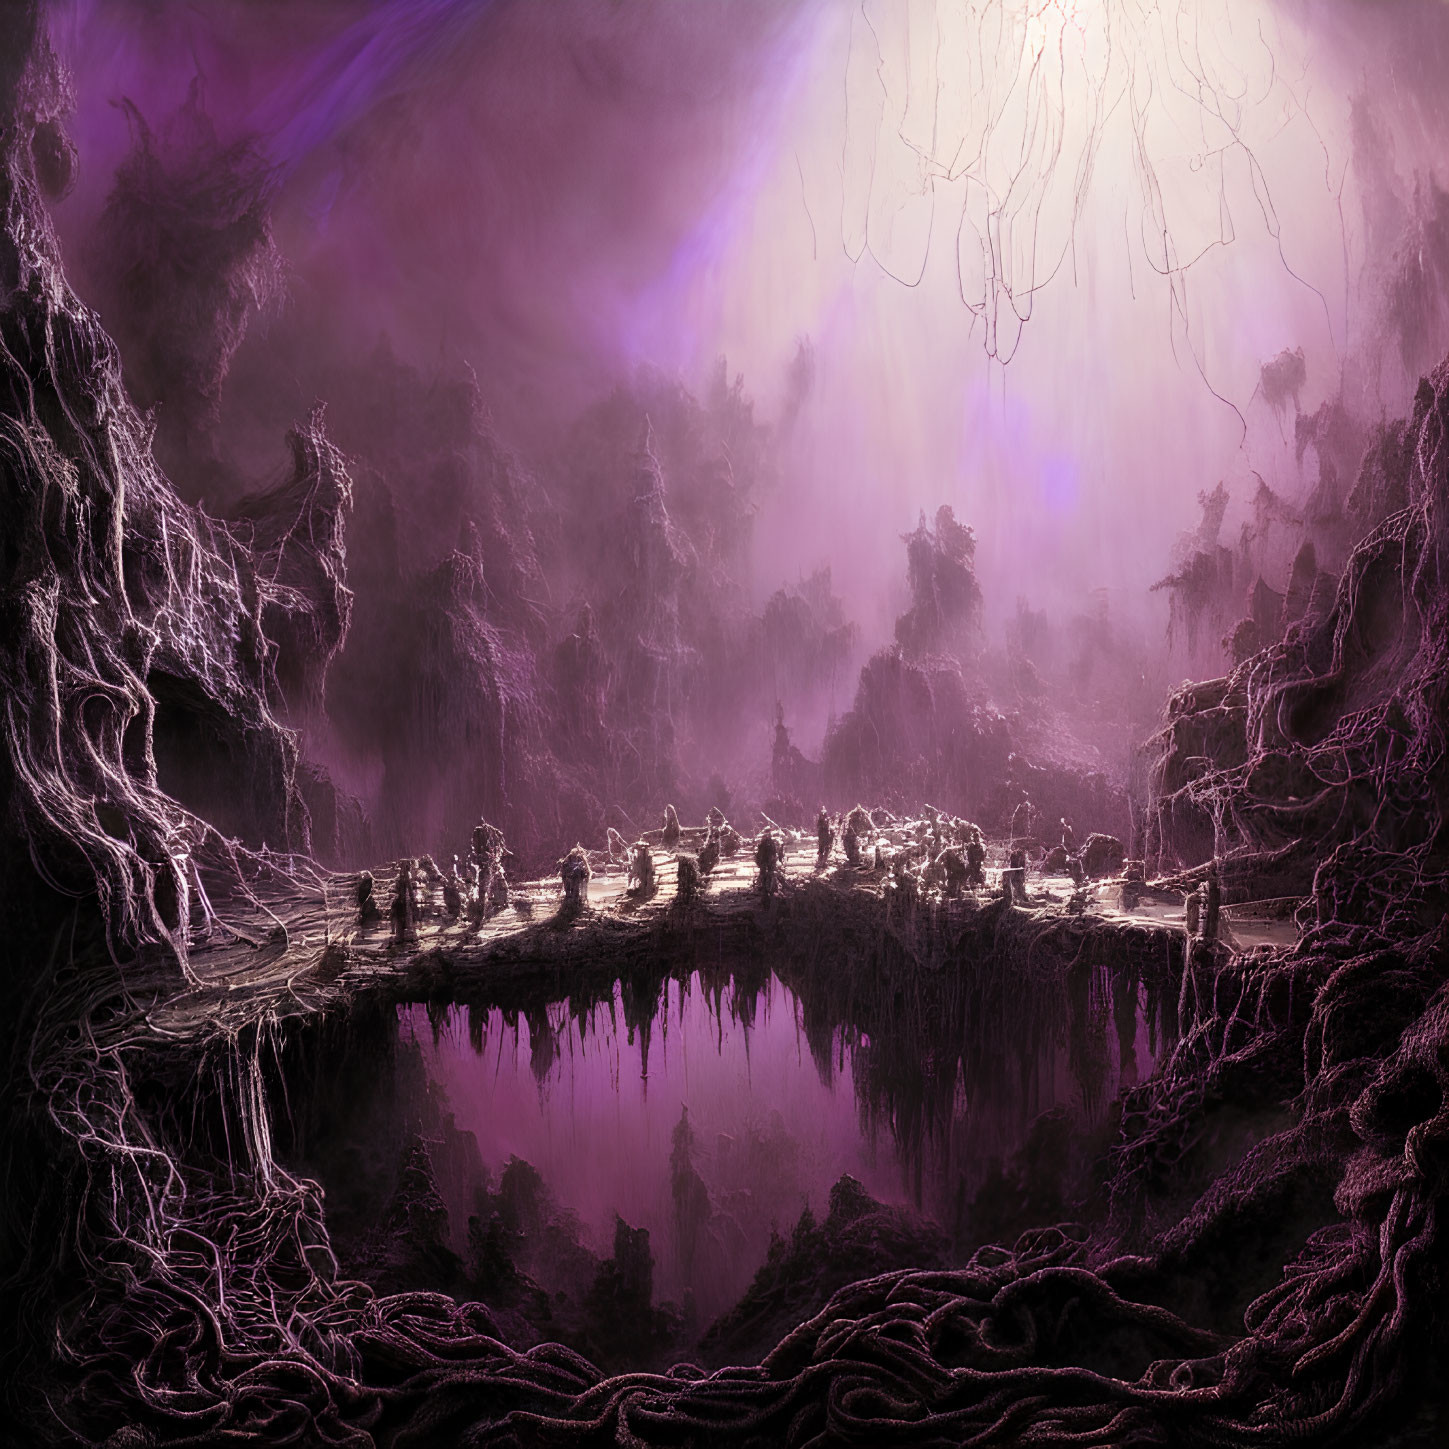 Mystical underground landscape with glowing purple hue and illuminated village surrounded by gnarled tree roots